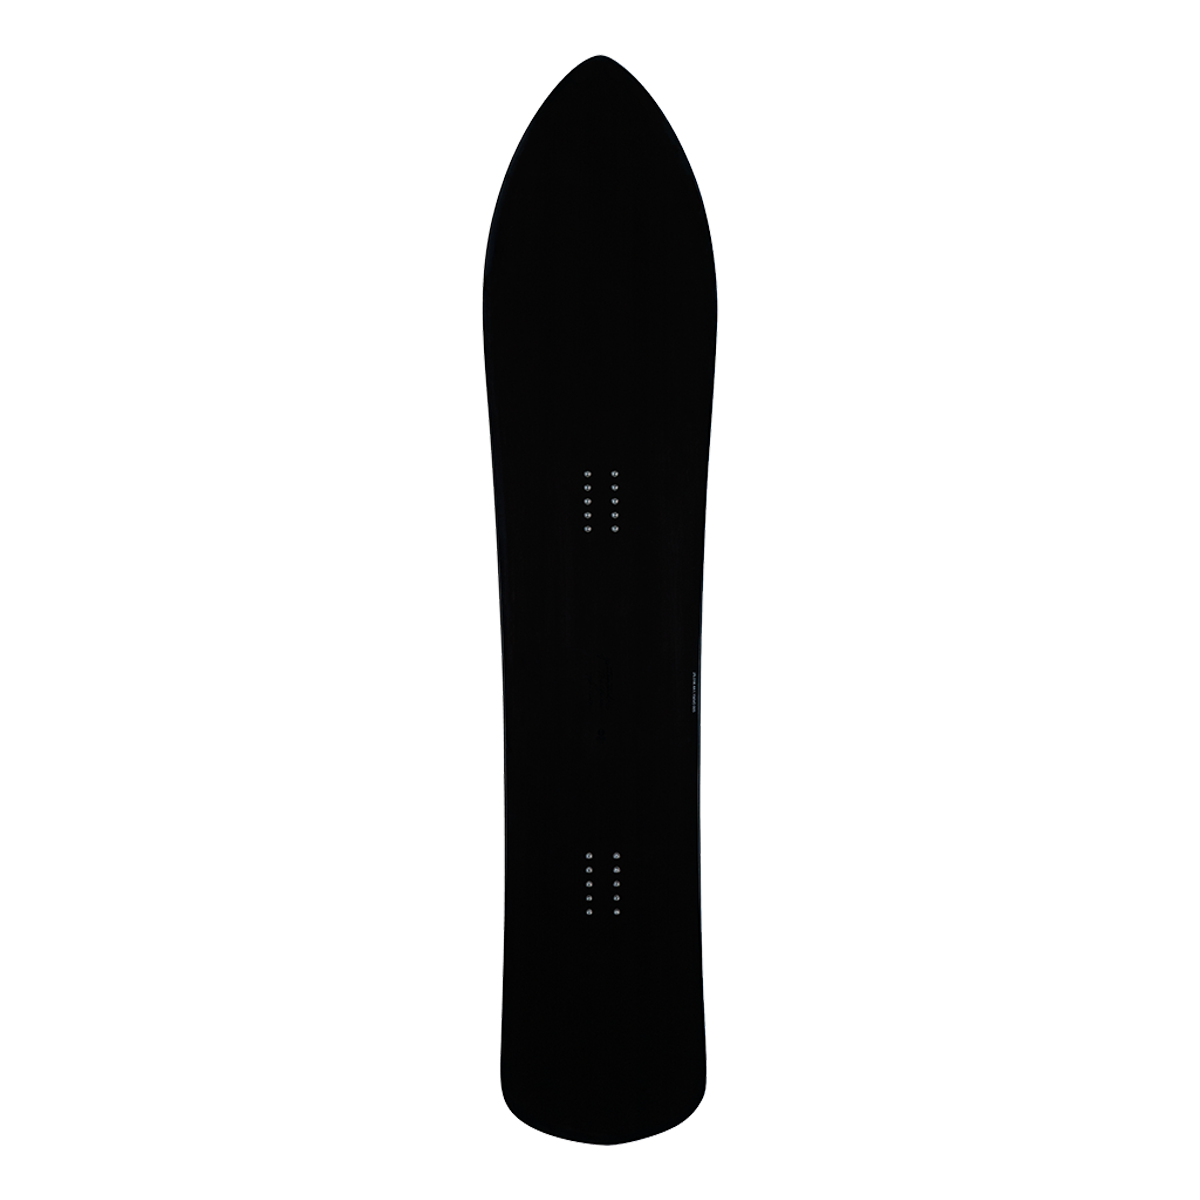 GENTEMSTICK 2025 THE CHASER 156 SNOWBOARD